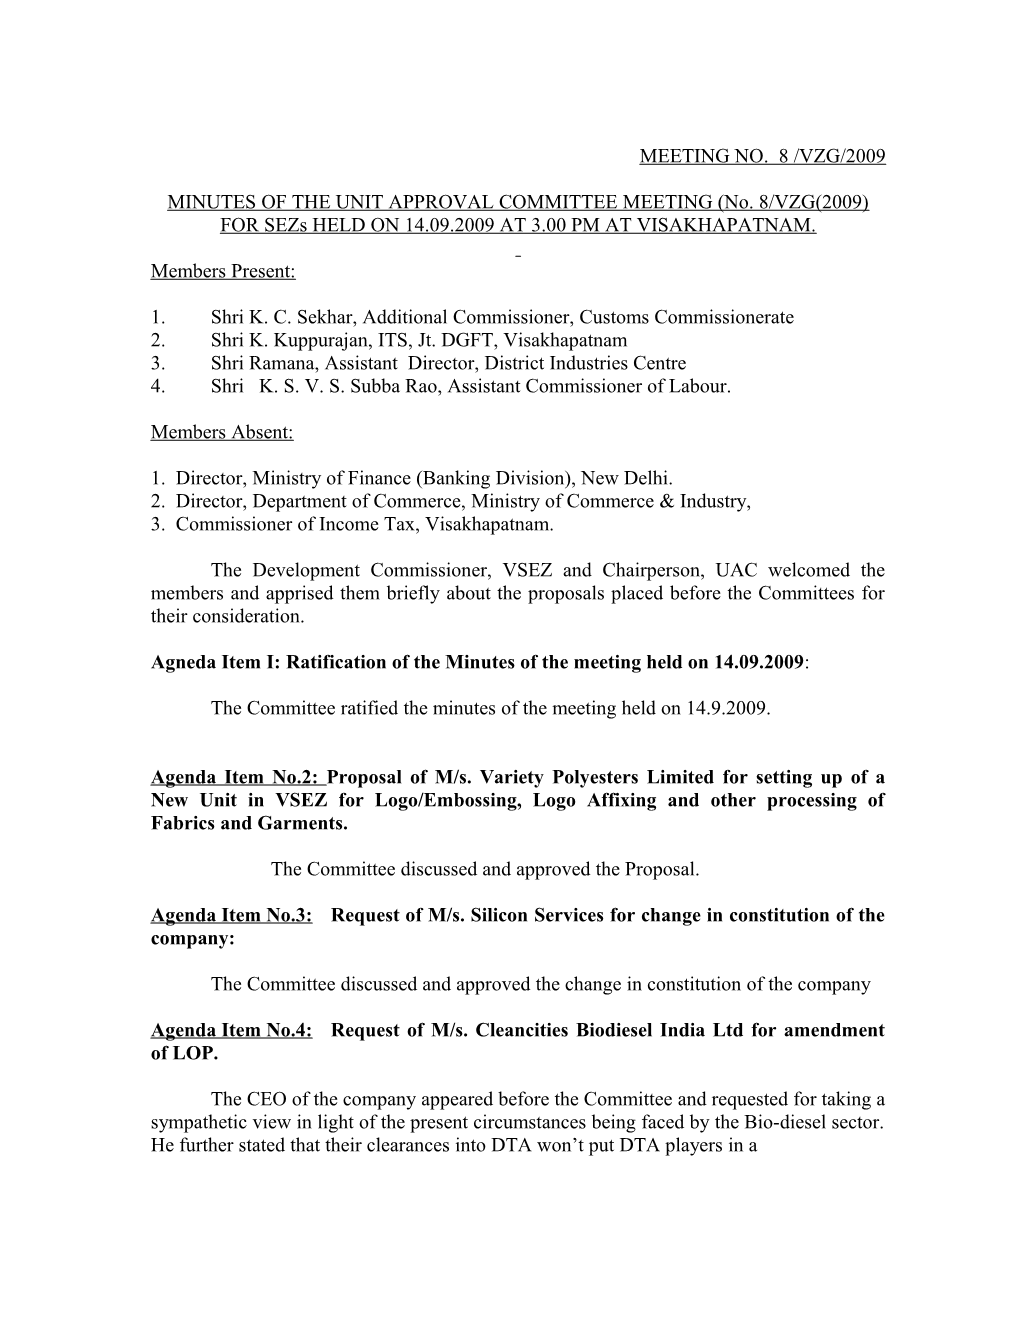 Agenda for the Third Combined Unit Approval Committees Meeting for the Sector Specific